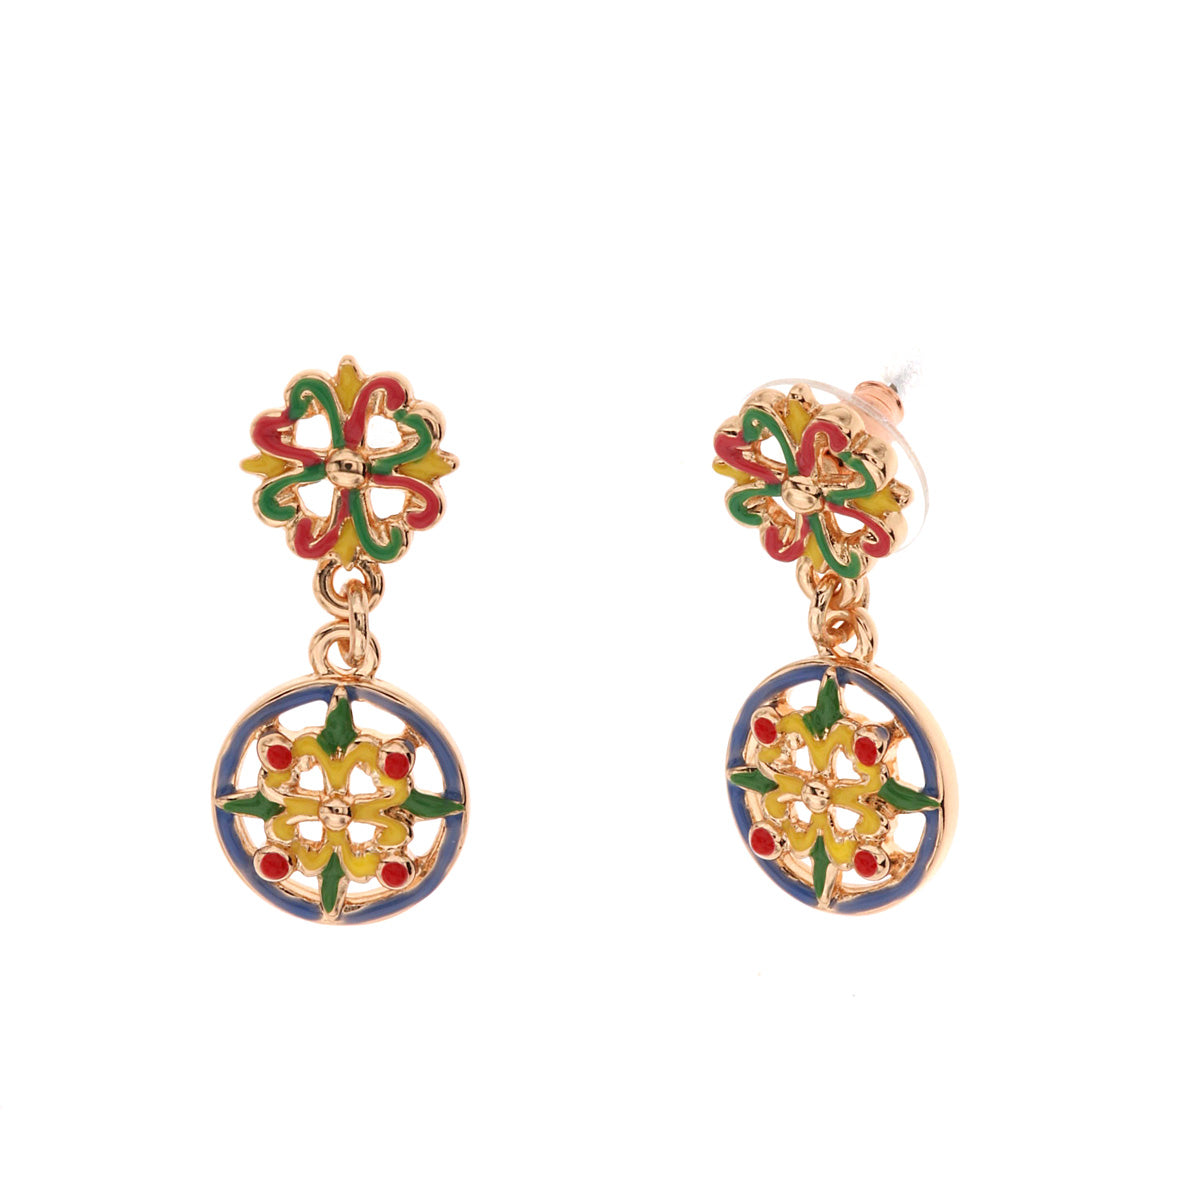 Metal earrings with Caltagirone majolica embellished with colored glazes